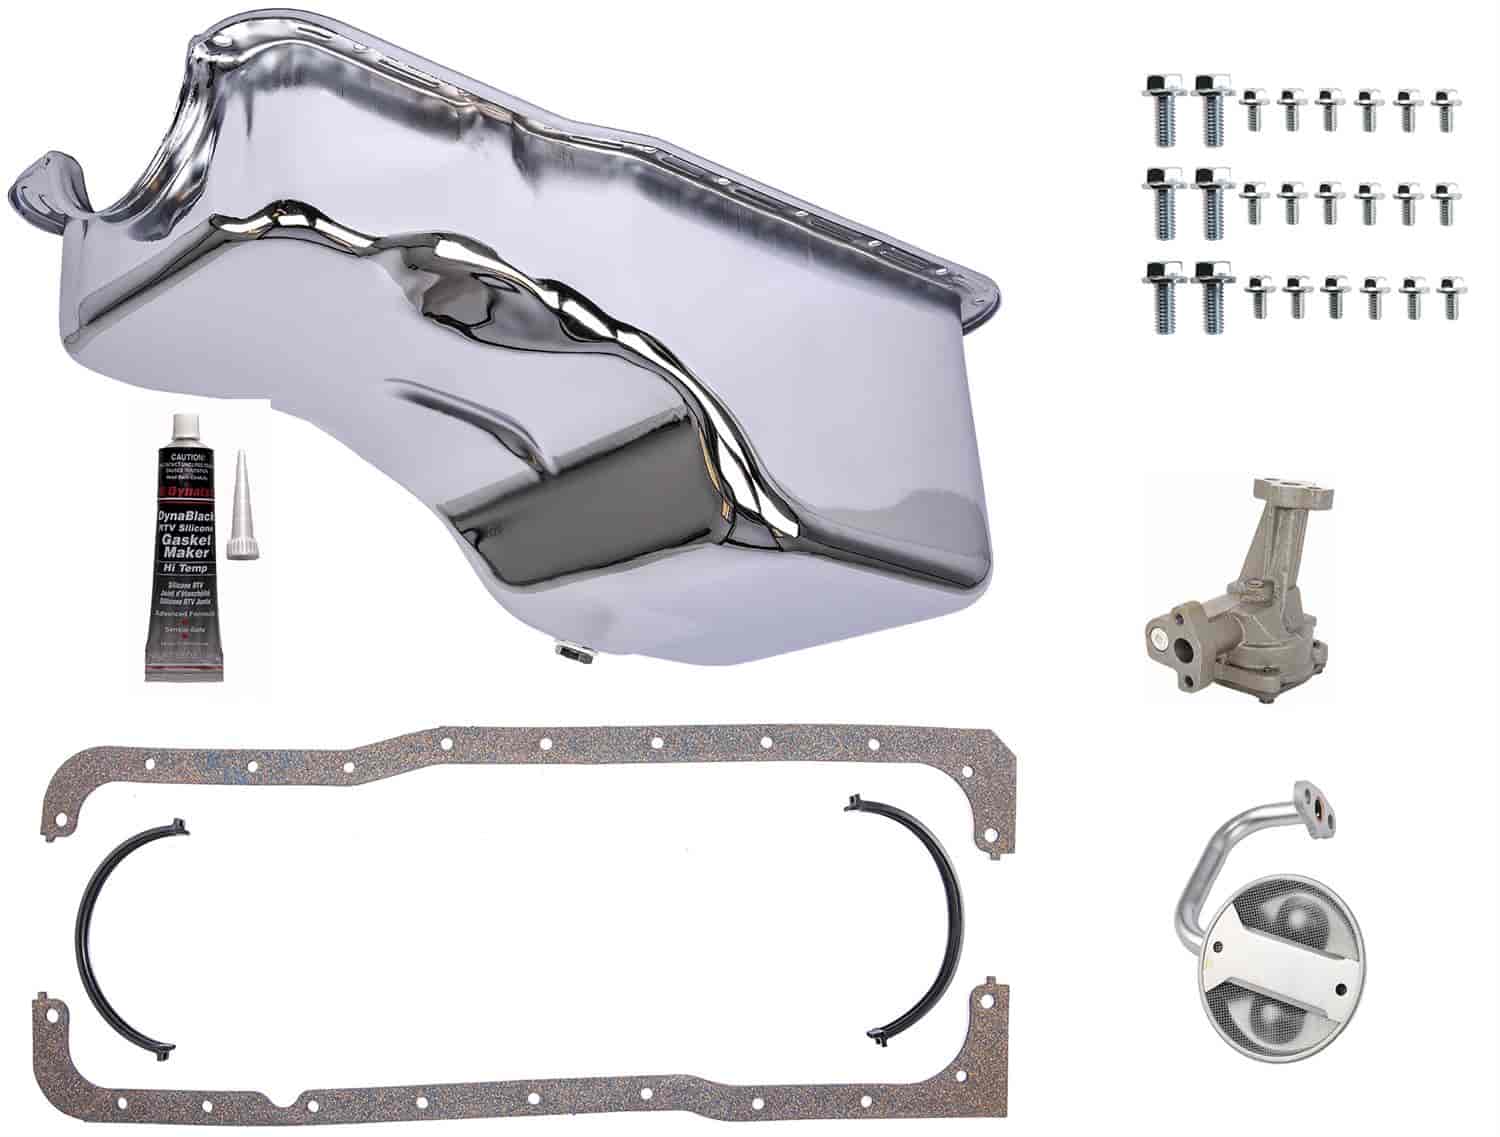 Stock-Style Replacement Oil Pan Kit for 1965-1987 Small